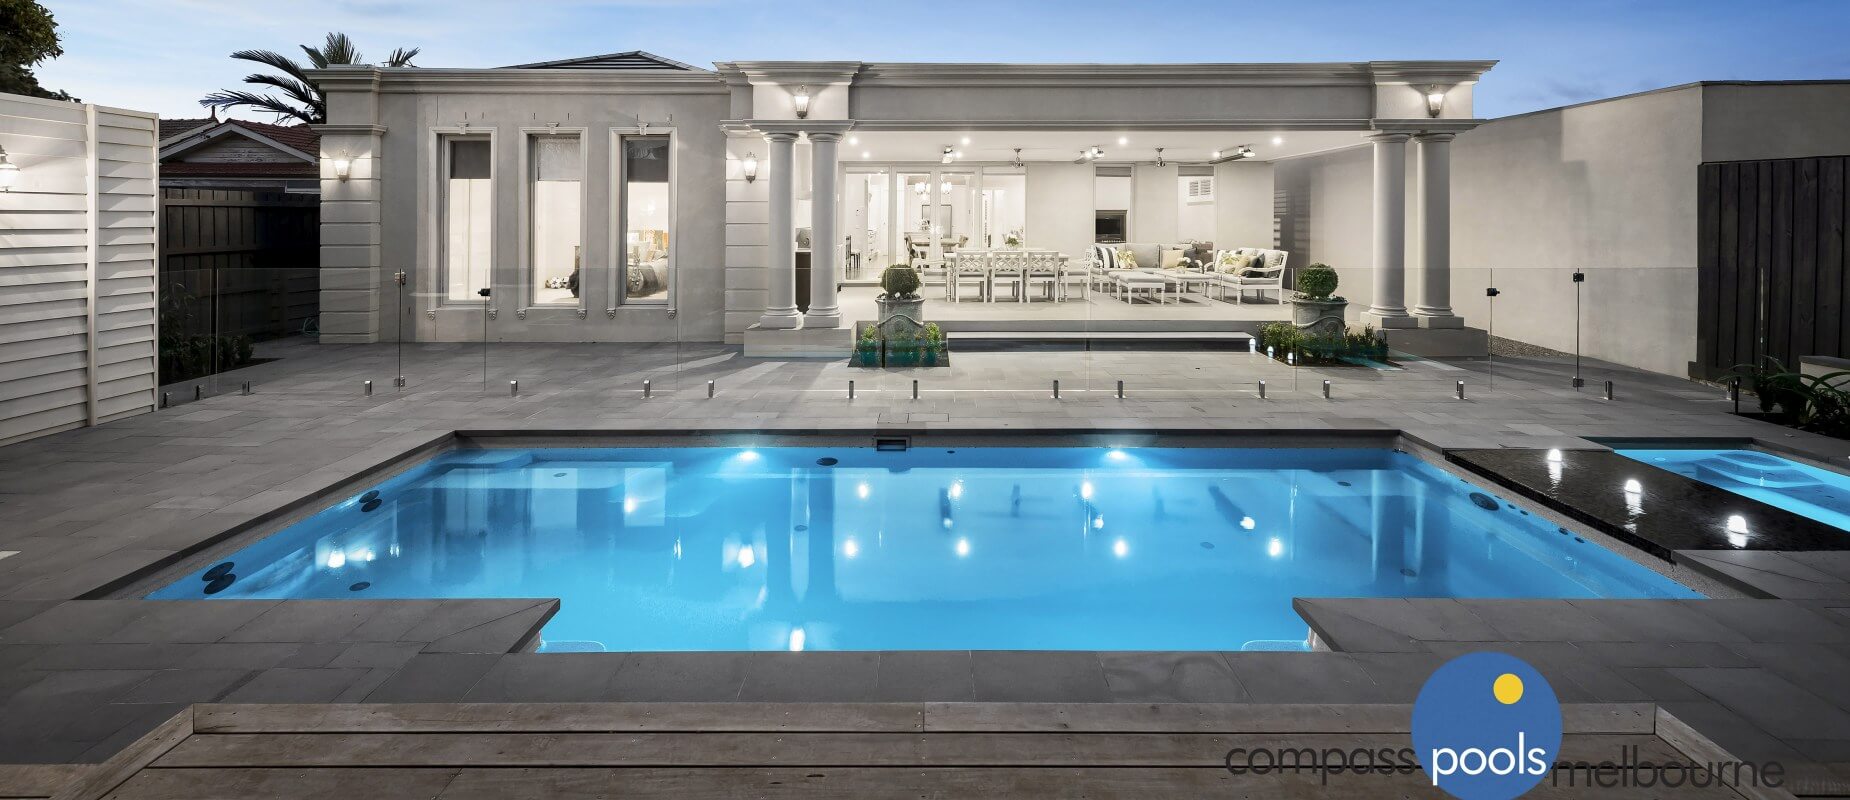 005-Compass-Pools-Australia_Smart-pool-with-self-cleaning-system-Vogue-pool-and-spa-combination-with-spa-jets-and-pool-lights